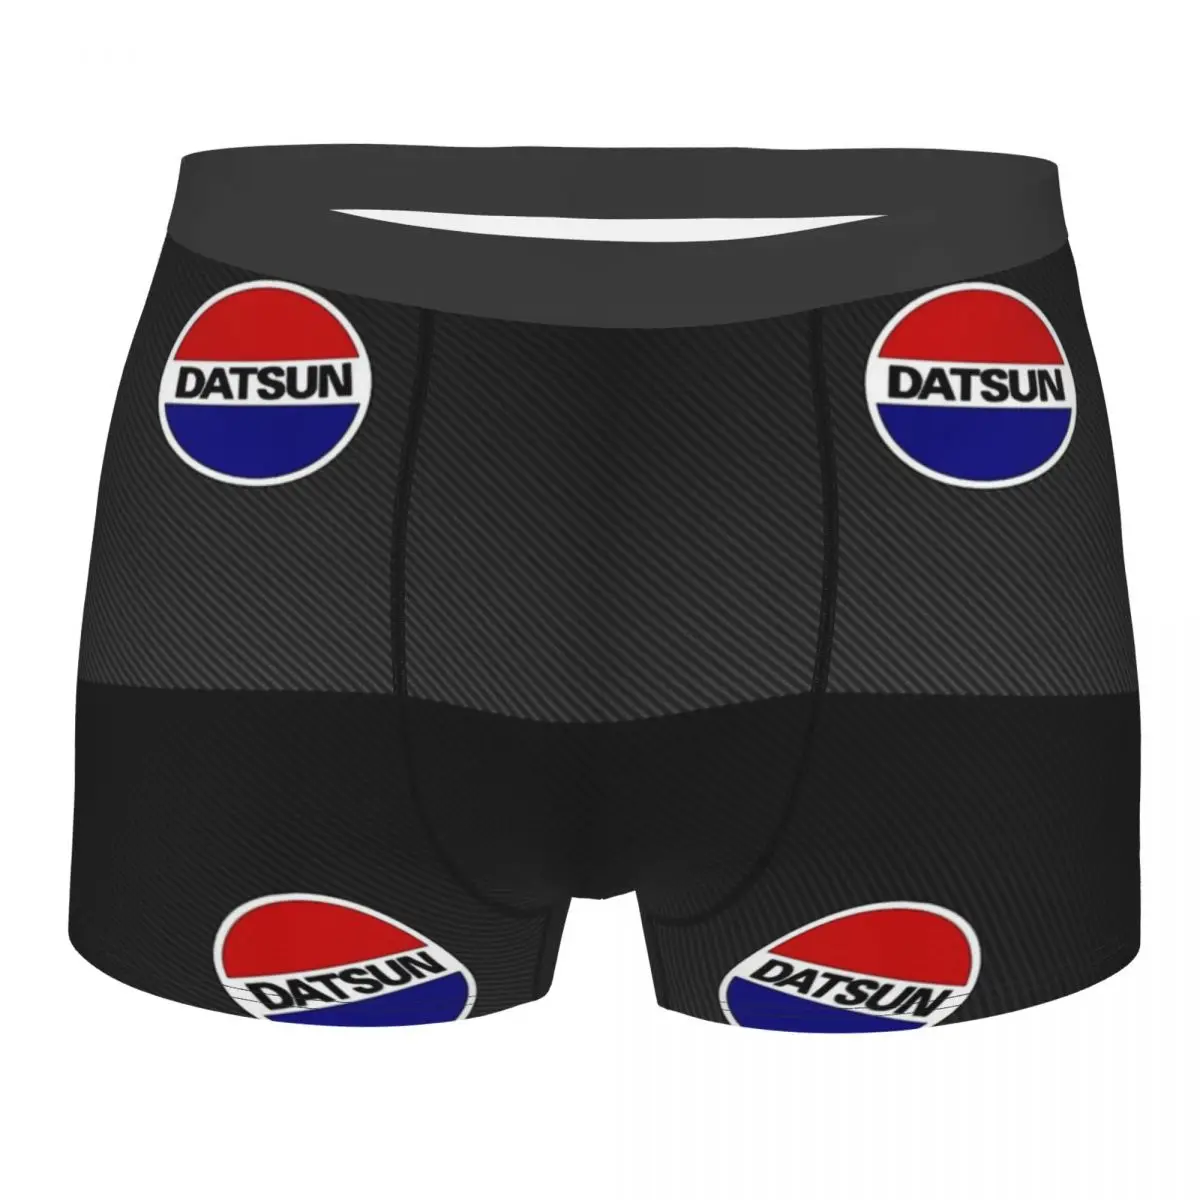 

Datsun Carbon Fiber Logo Man's Boxer Briefs Datsun Highly Breathable Underpants Top Quality Print Shorts Birthday Gifts